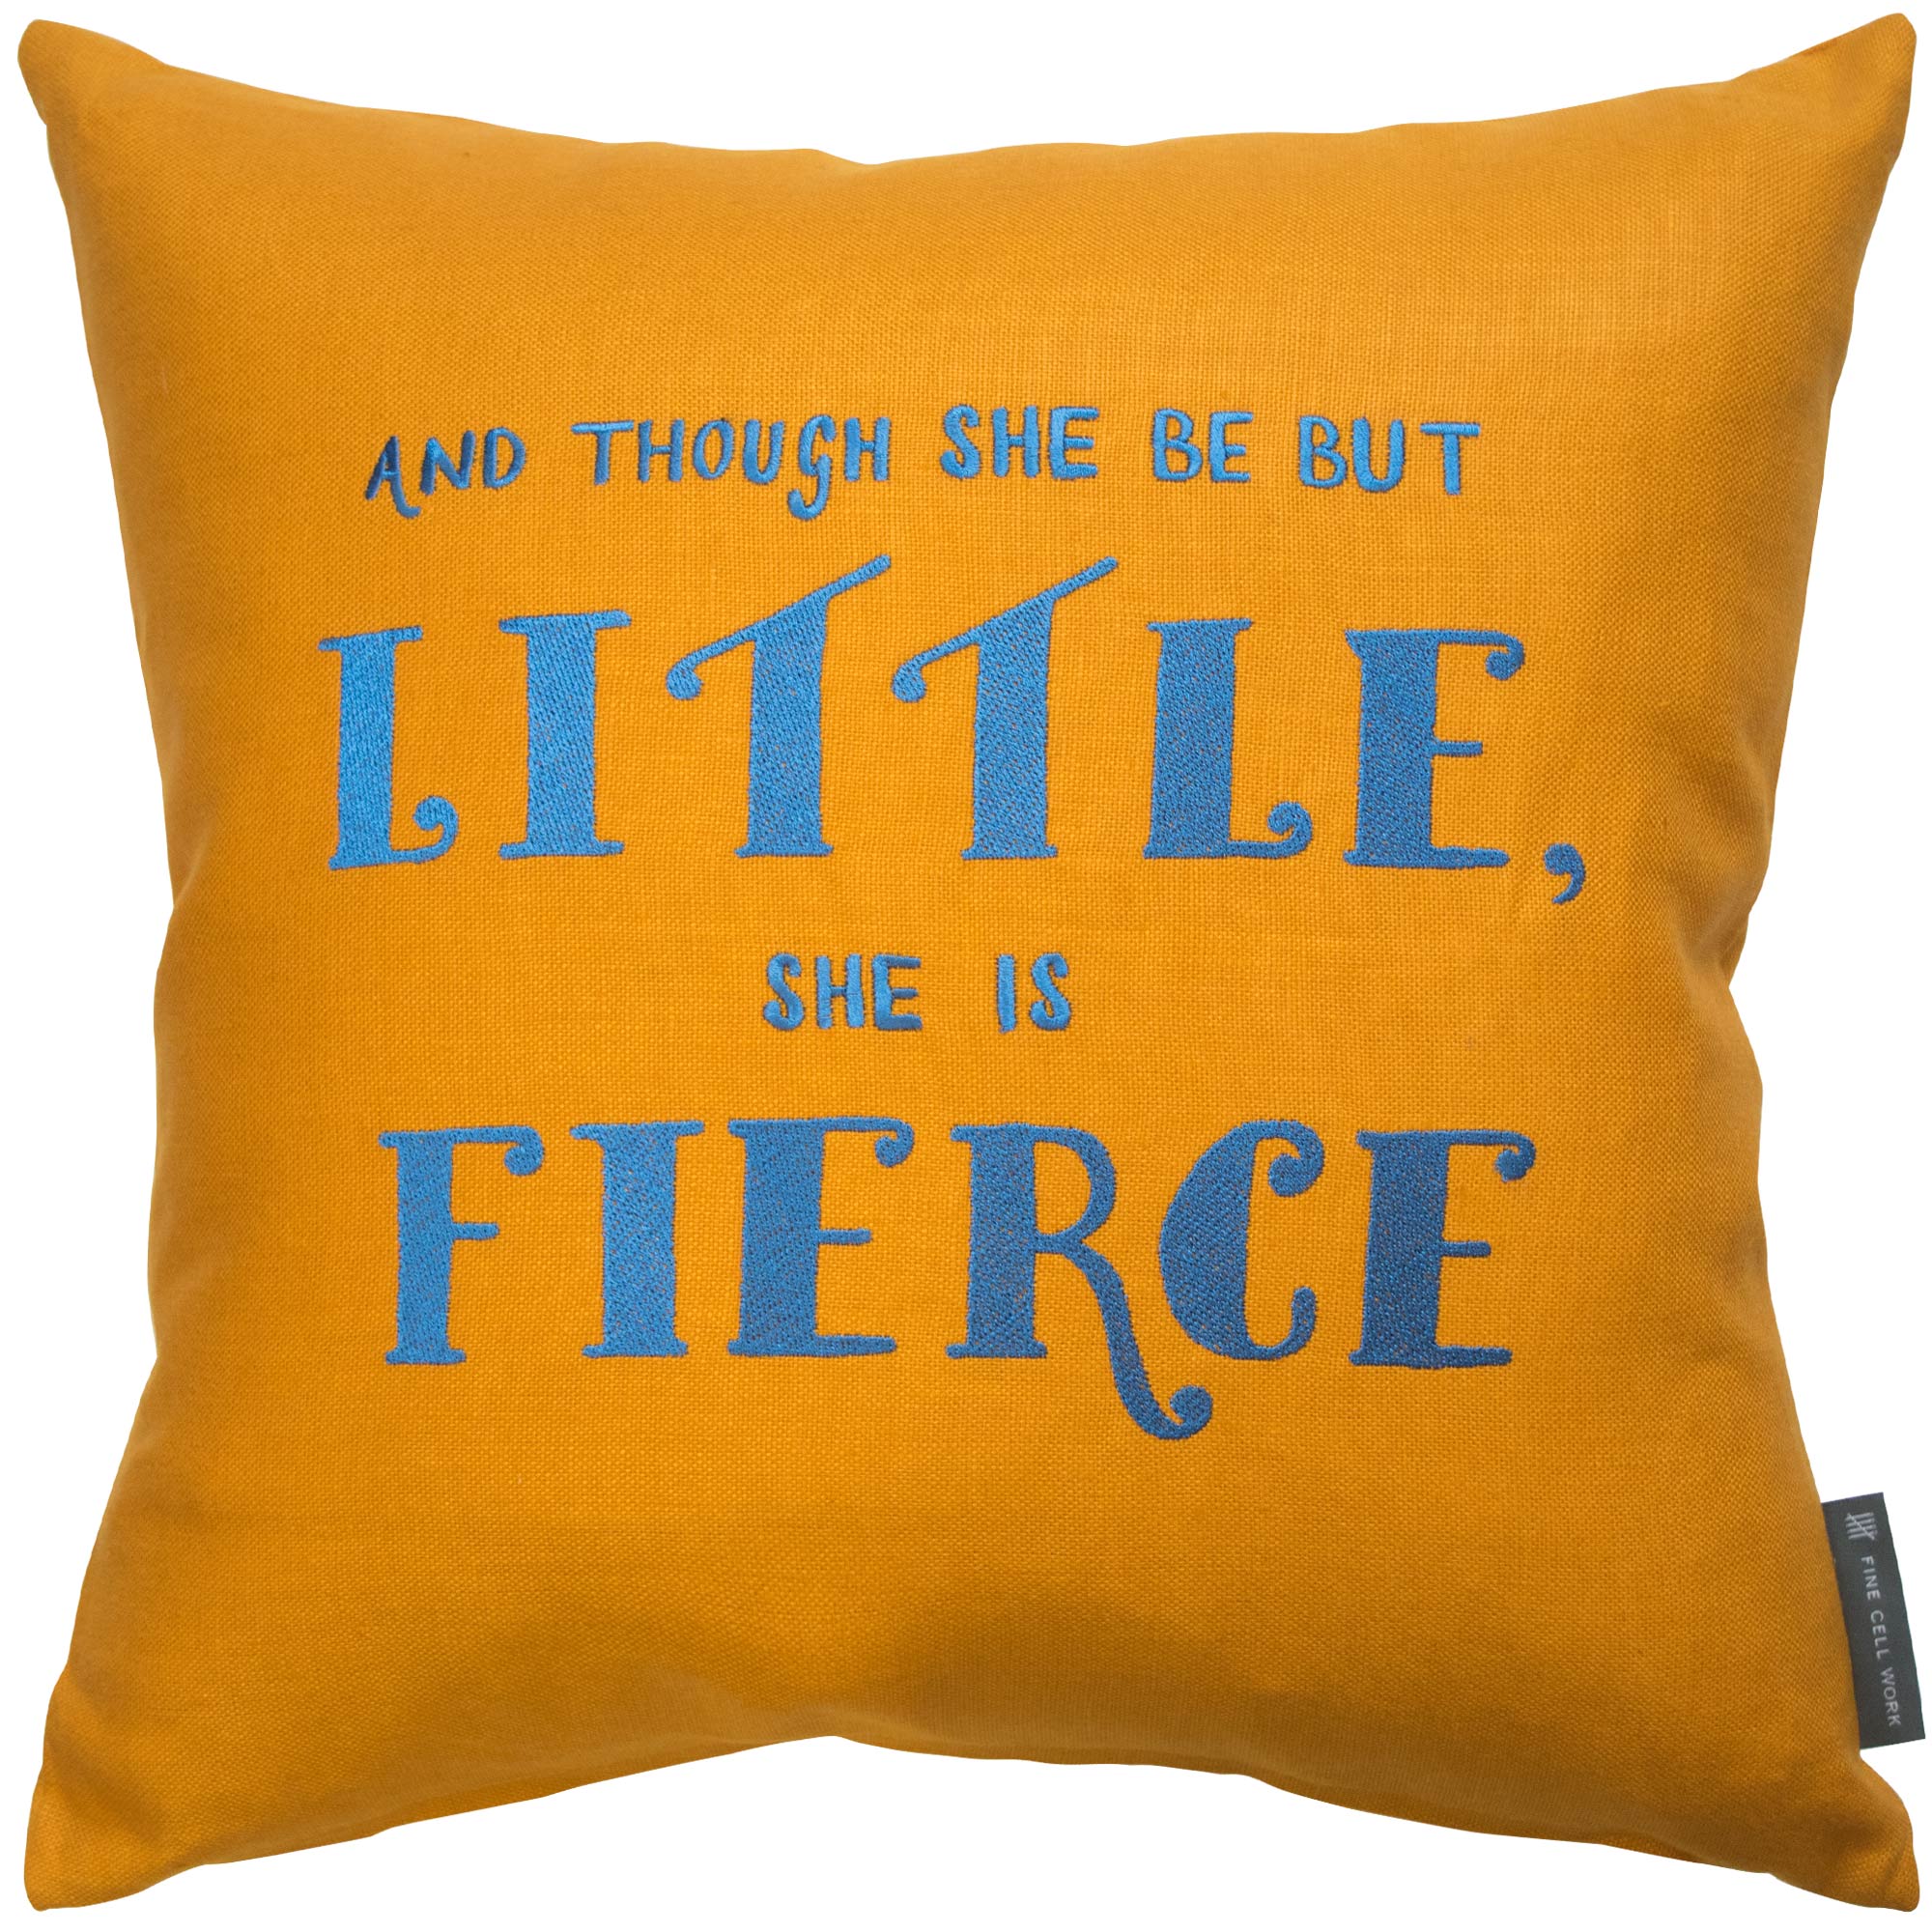 Fine Cell Work Felicity Kendall Shakespeare Midnight Summer's Dream 'Though she be but little, she is fierce' Embroidered Cushion Mustard Yellow Blue